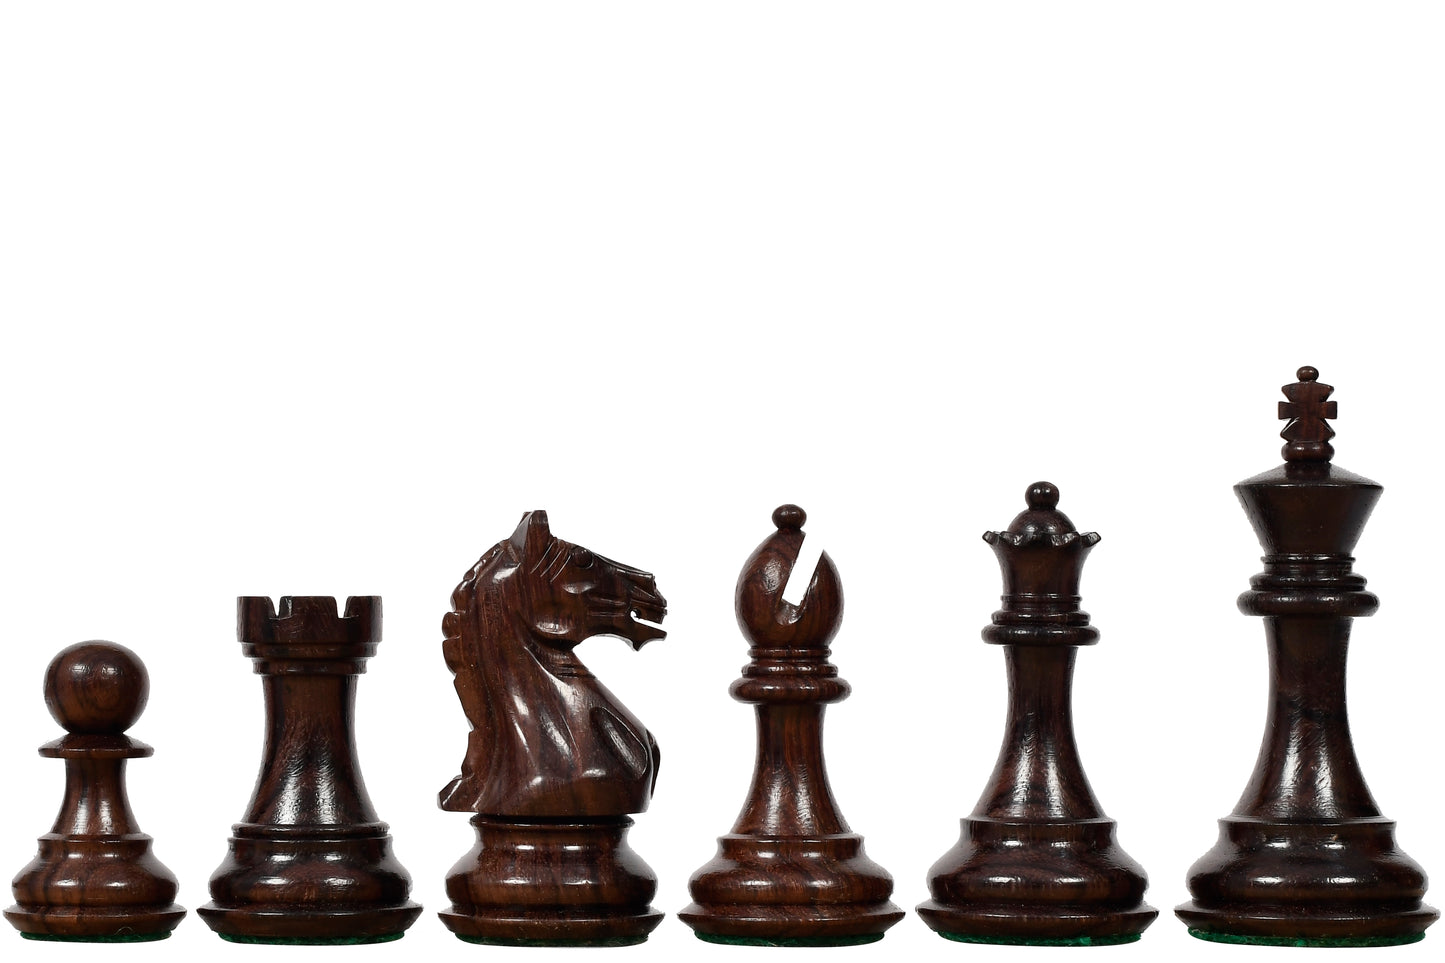 The Fierce Knight Staunton Wooden Chess Pieces in Indian Rosewood & Box Wood - 3.5" King